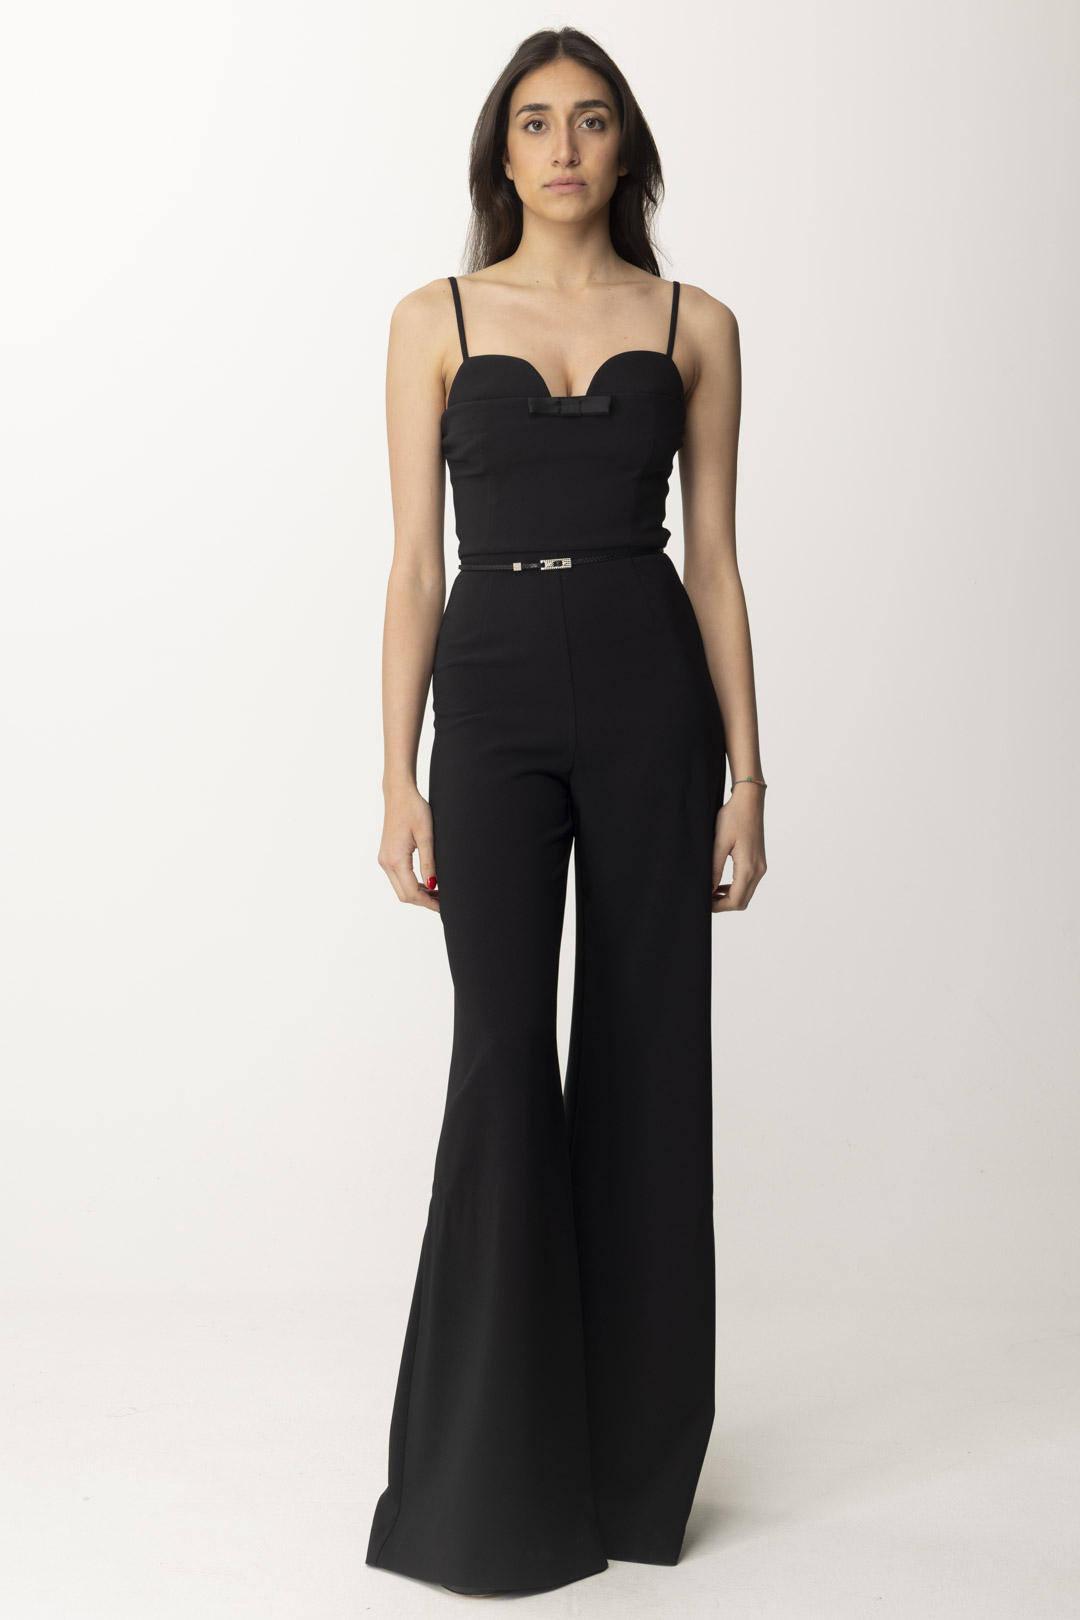 Preview: Elisabetta Franchi Satin Bow Jumpsuit with Strap Nero